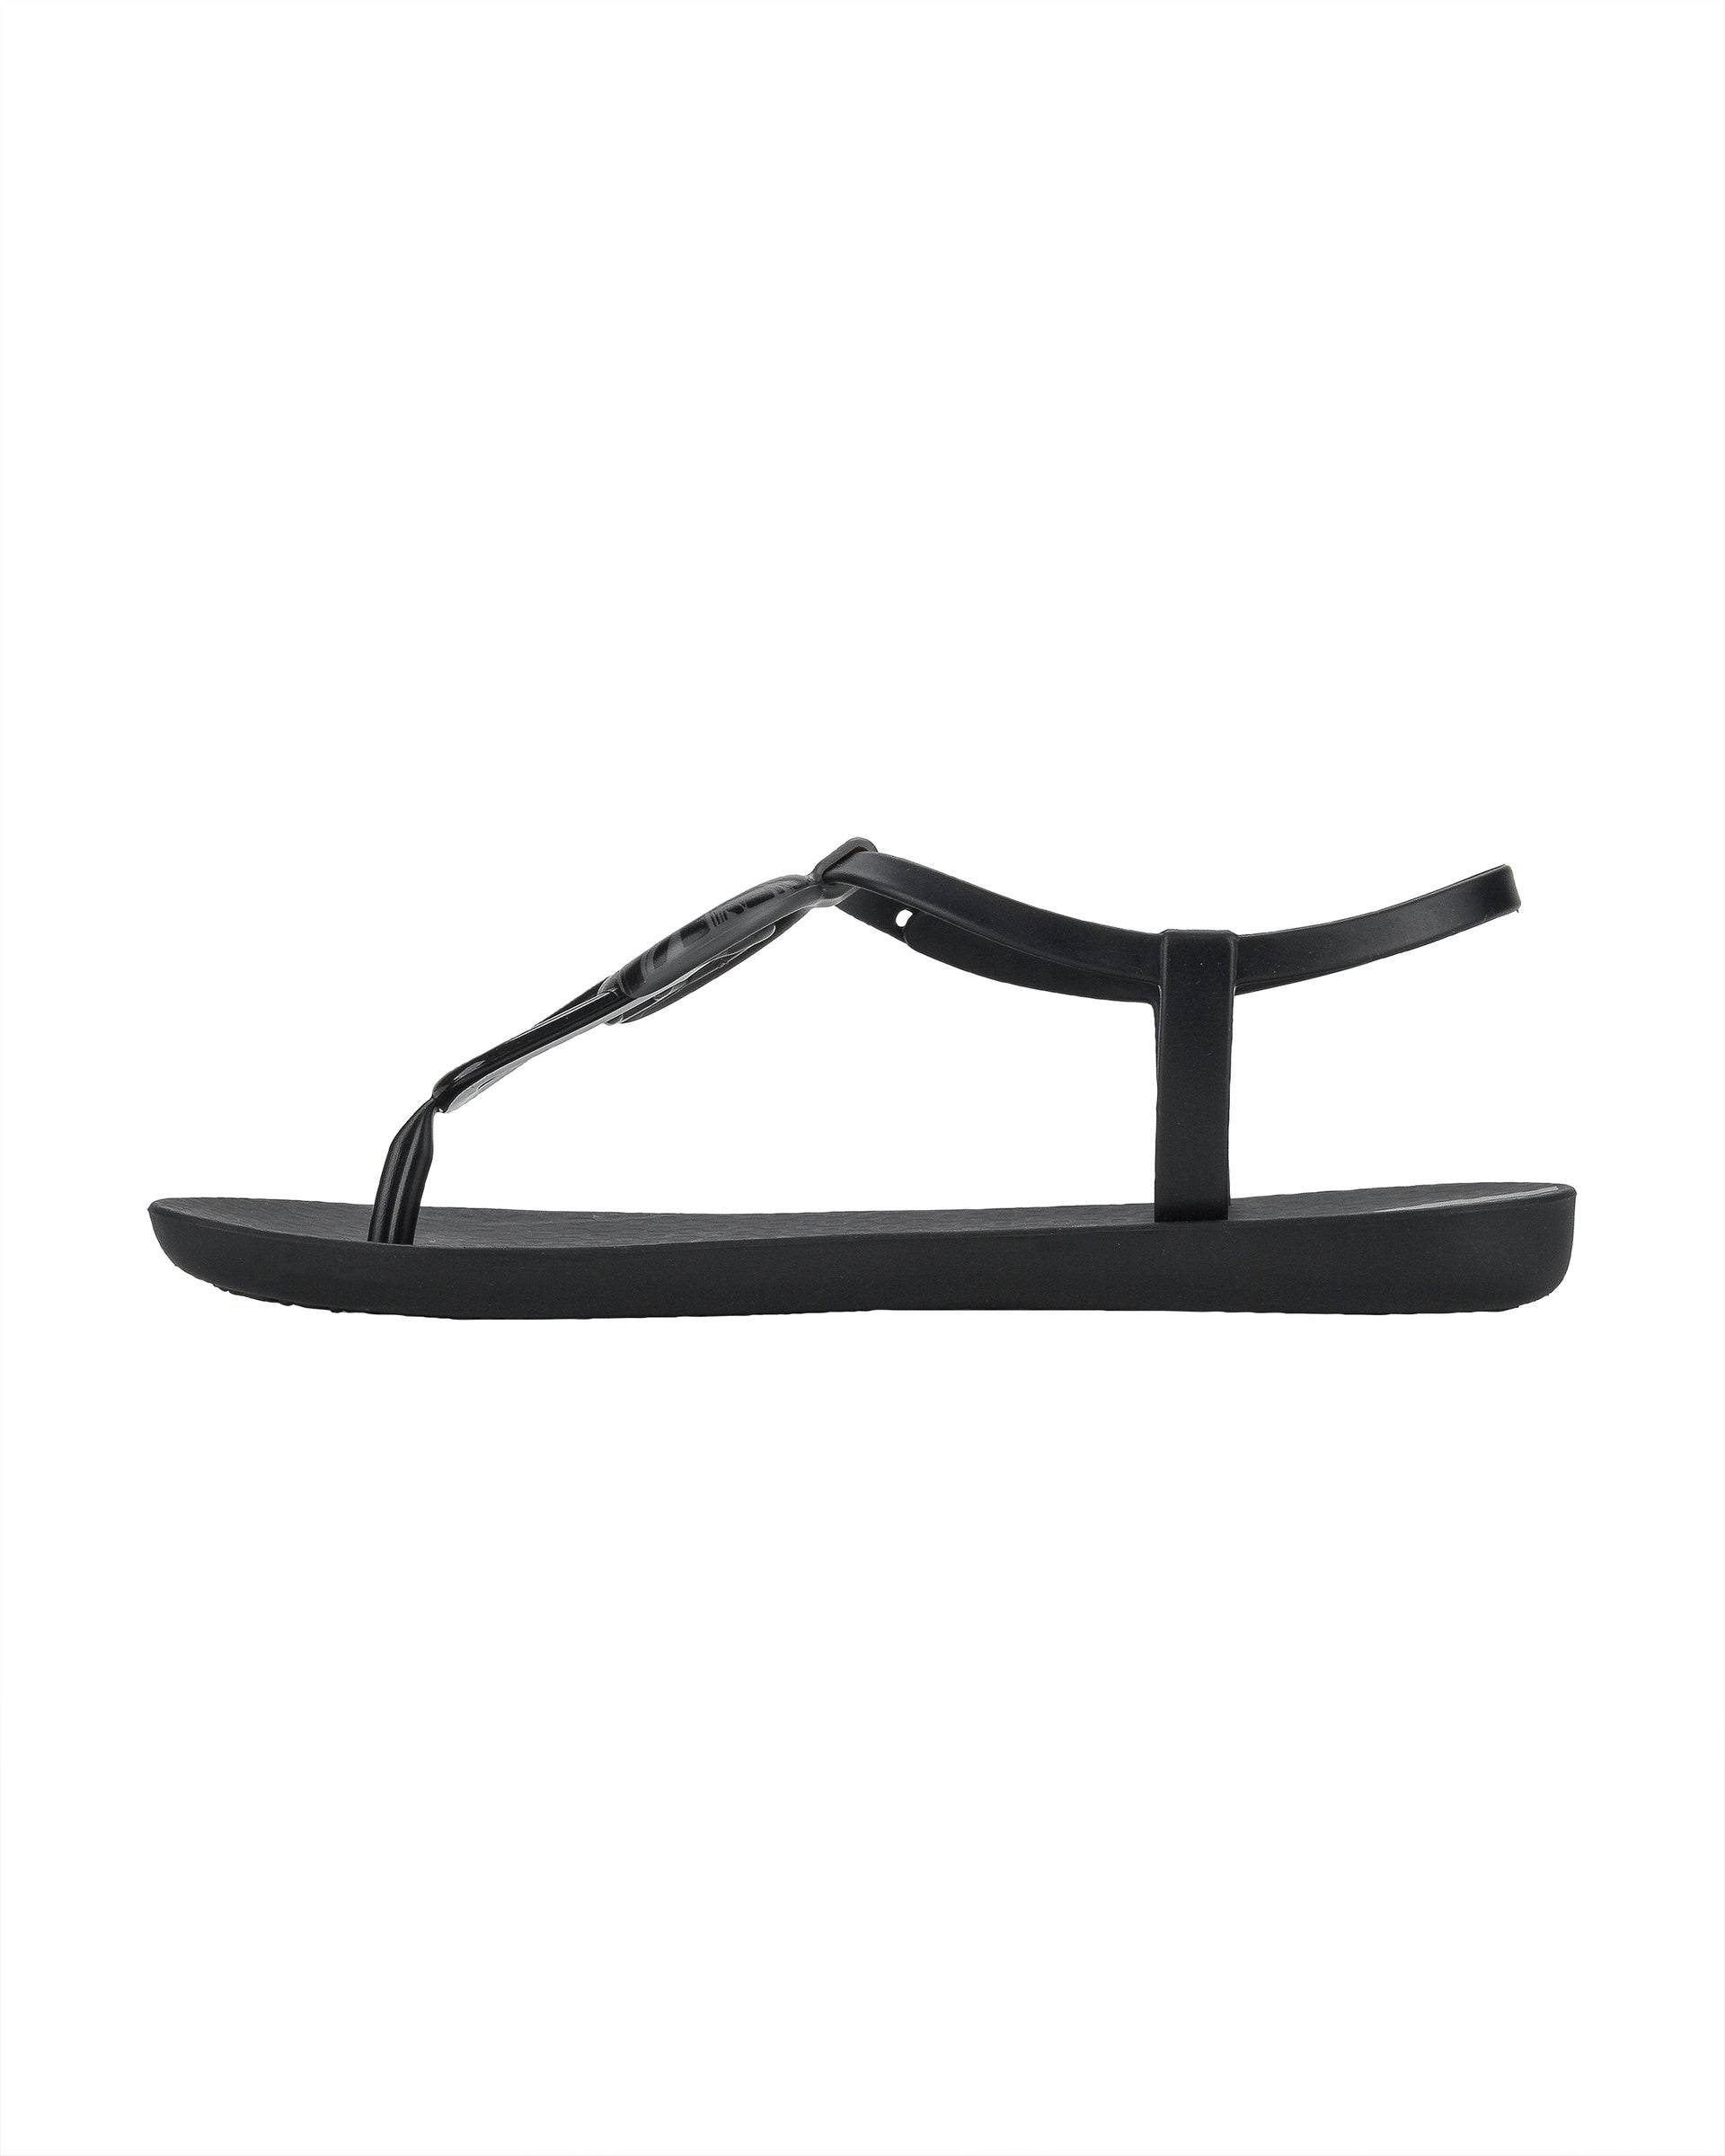 Inner side view of a black Ipanema Class Marble women's t-strap sandal.